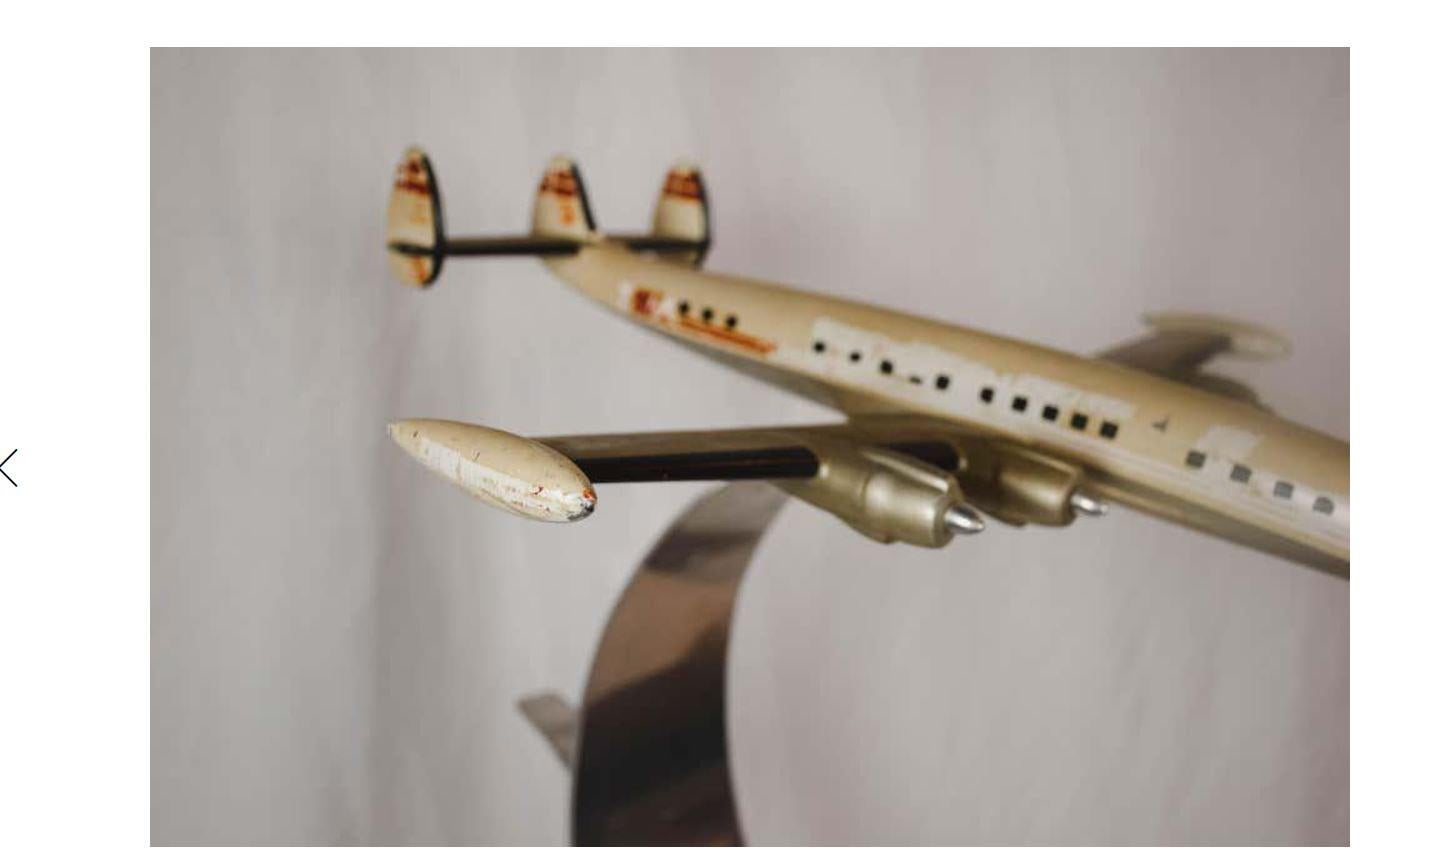 American Mid-20th Century Twa Trans World Airlines Airplane Model on Chrome Base For Sale